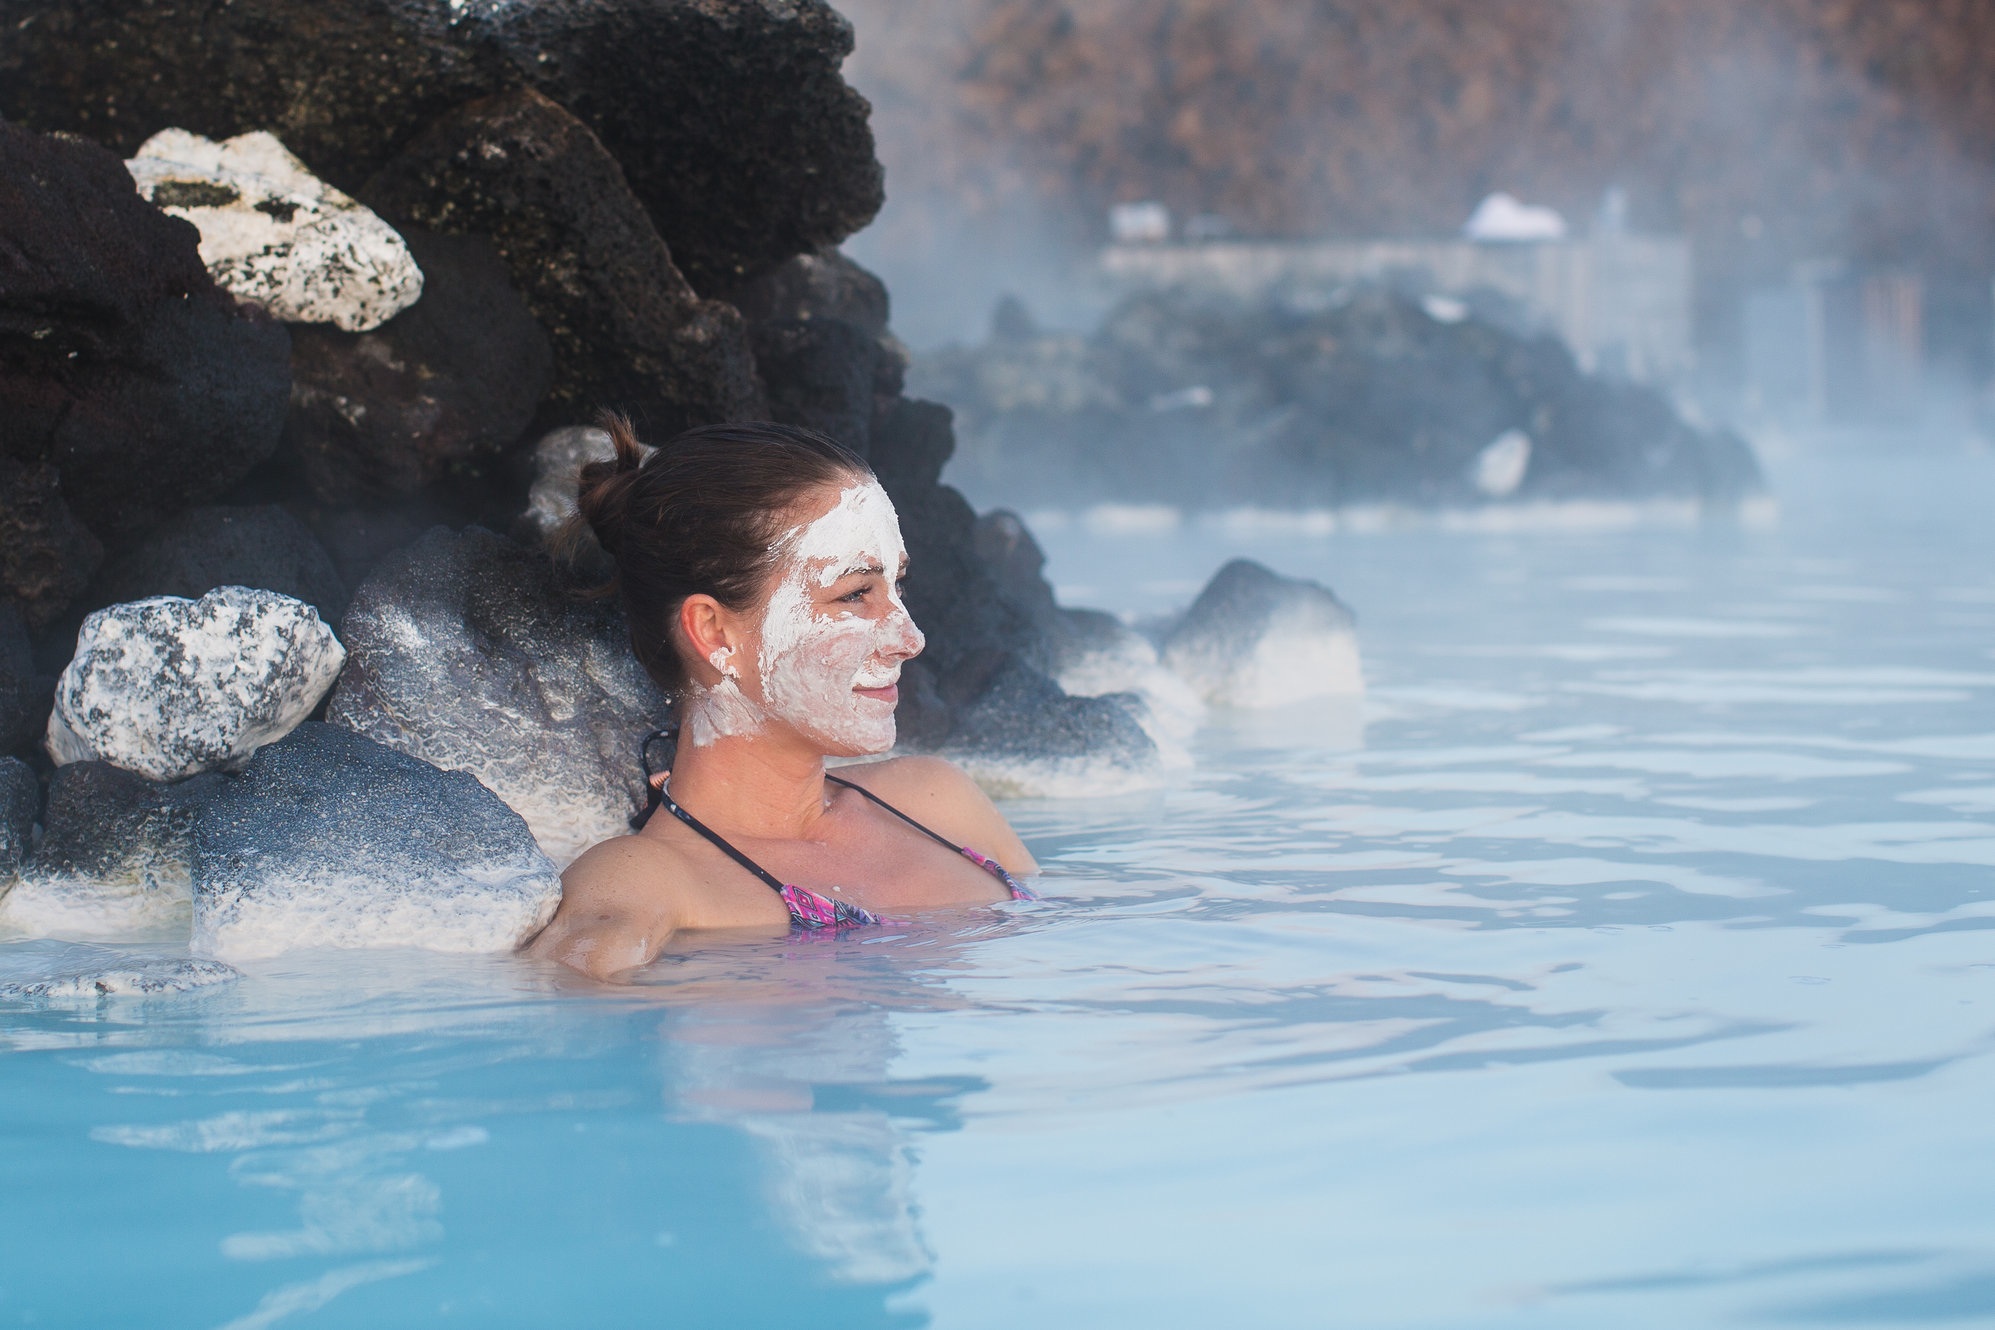 The Blue Lagoon's natural heat and skin-smoothing algae will comfort you and ease the tension from tired muscles.